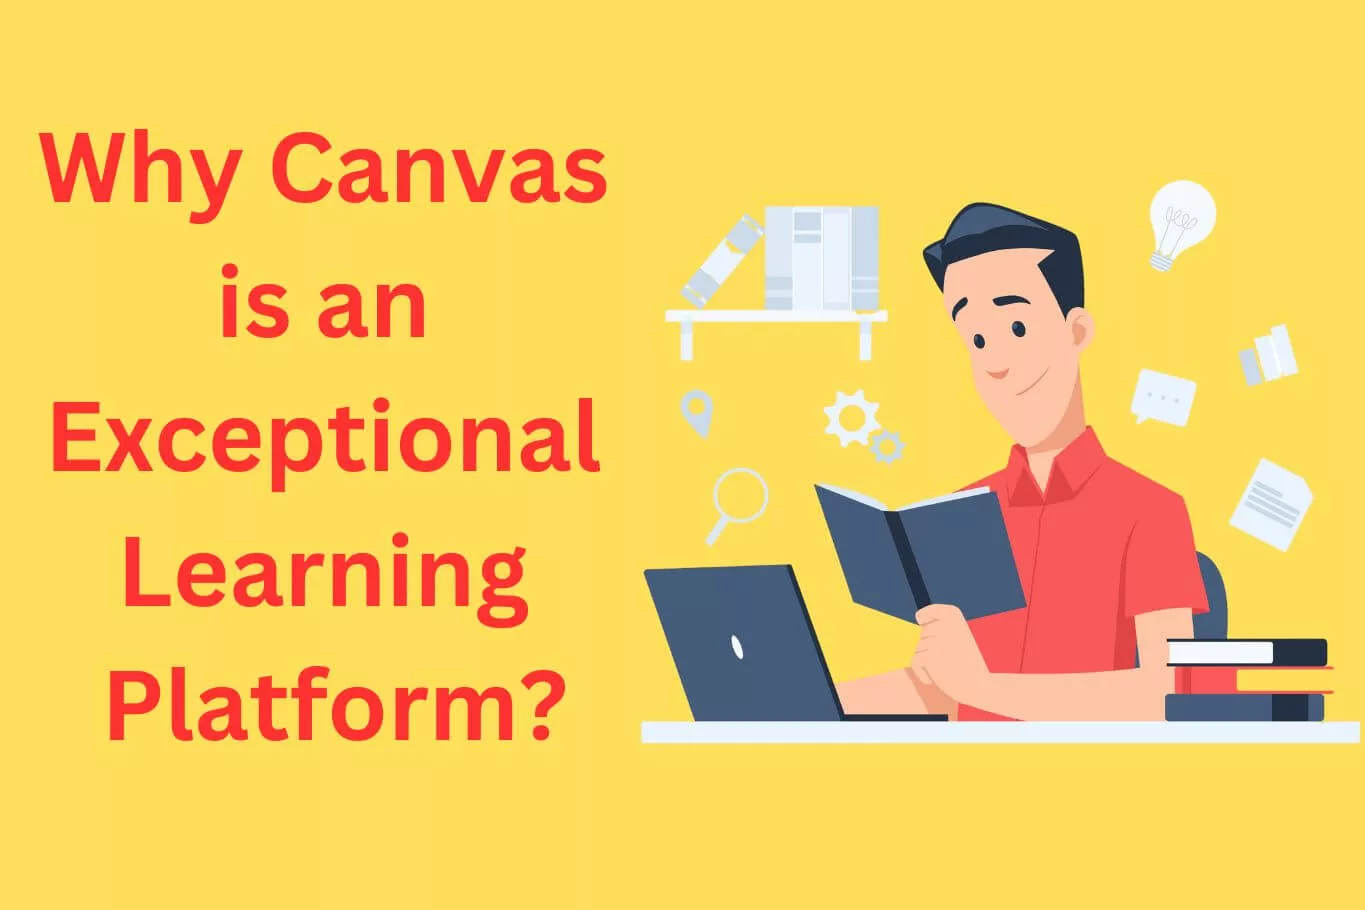 Why Canvas is an Exceptional Learning Platform?